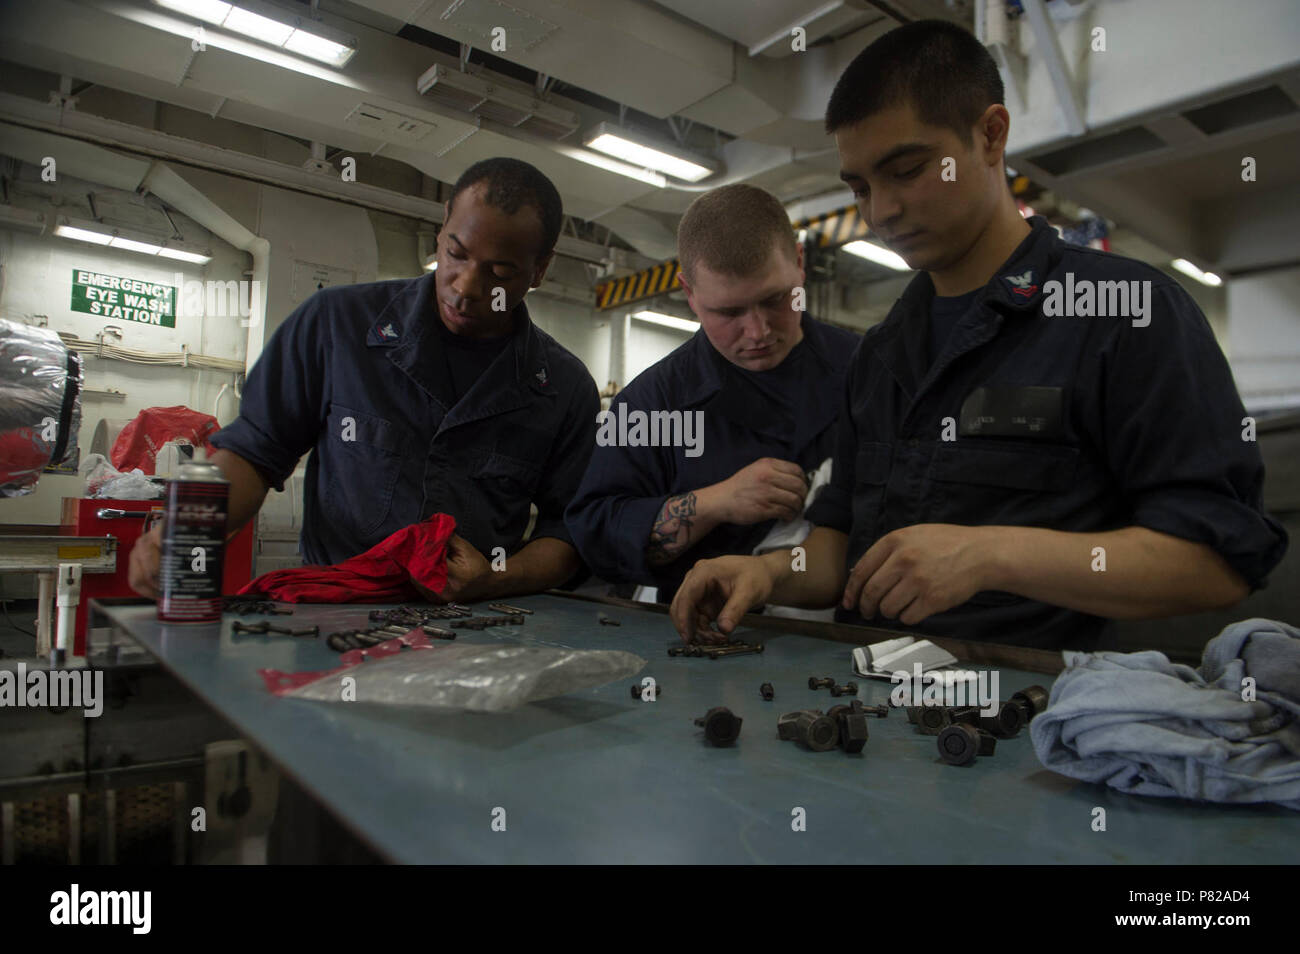 ATLANTIC OCEAN (June 3, 2016) - Aviation Machinist's Mate 3rd Class Sevan Woods, Aviation Machinist's Mate Airman Vincent Weinberg and Aviation Machinist's Mate 2nd Class Steven Vasquez, Sailors on board the aircraft carrier USS Dwight D. Eisenhower (CVN 69), prepare tools to reassemble the afterburner of a F/A-18 E/F Superhornet. Dwight D. Eisenhower is currently underway as part of CSG 10 deployment in support of maritime security operations and theater security cooperation efforts in the U.S. 5th and 6th Fleet areas of responsibility. With CVN 69 as the flagship, strike group assets include Stock Photo